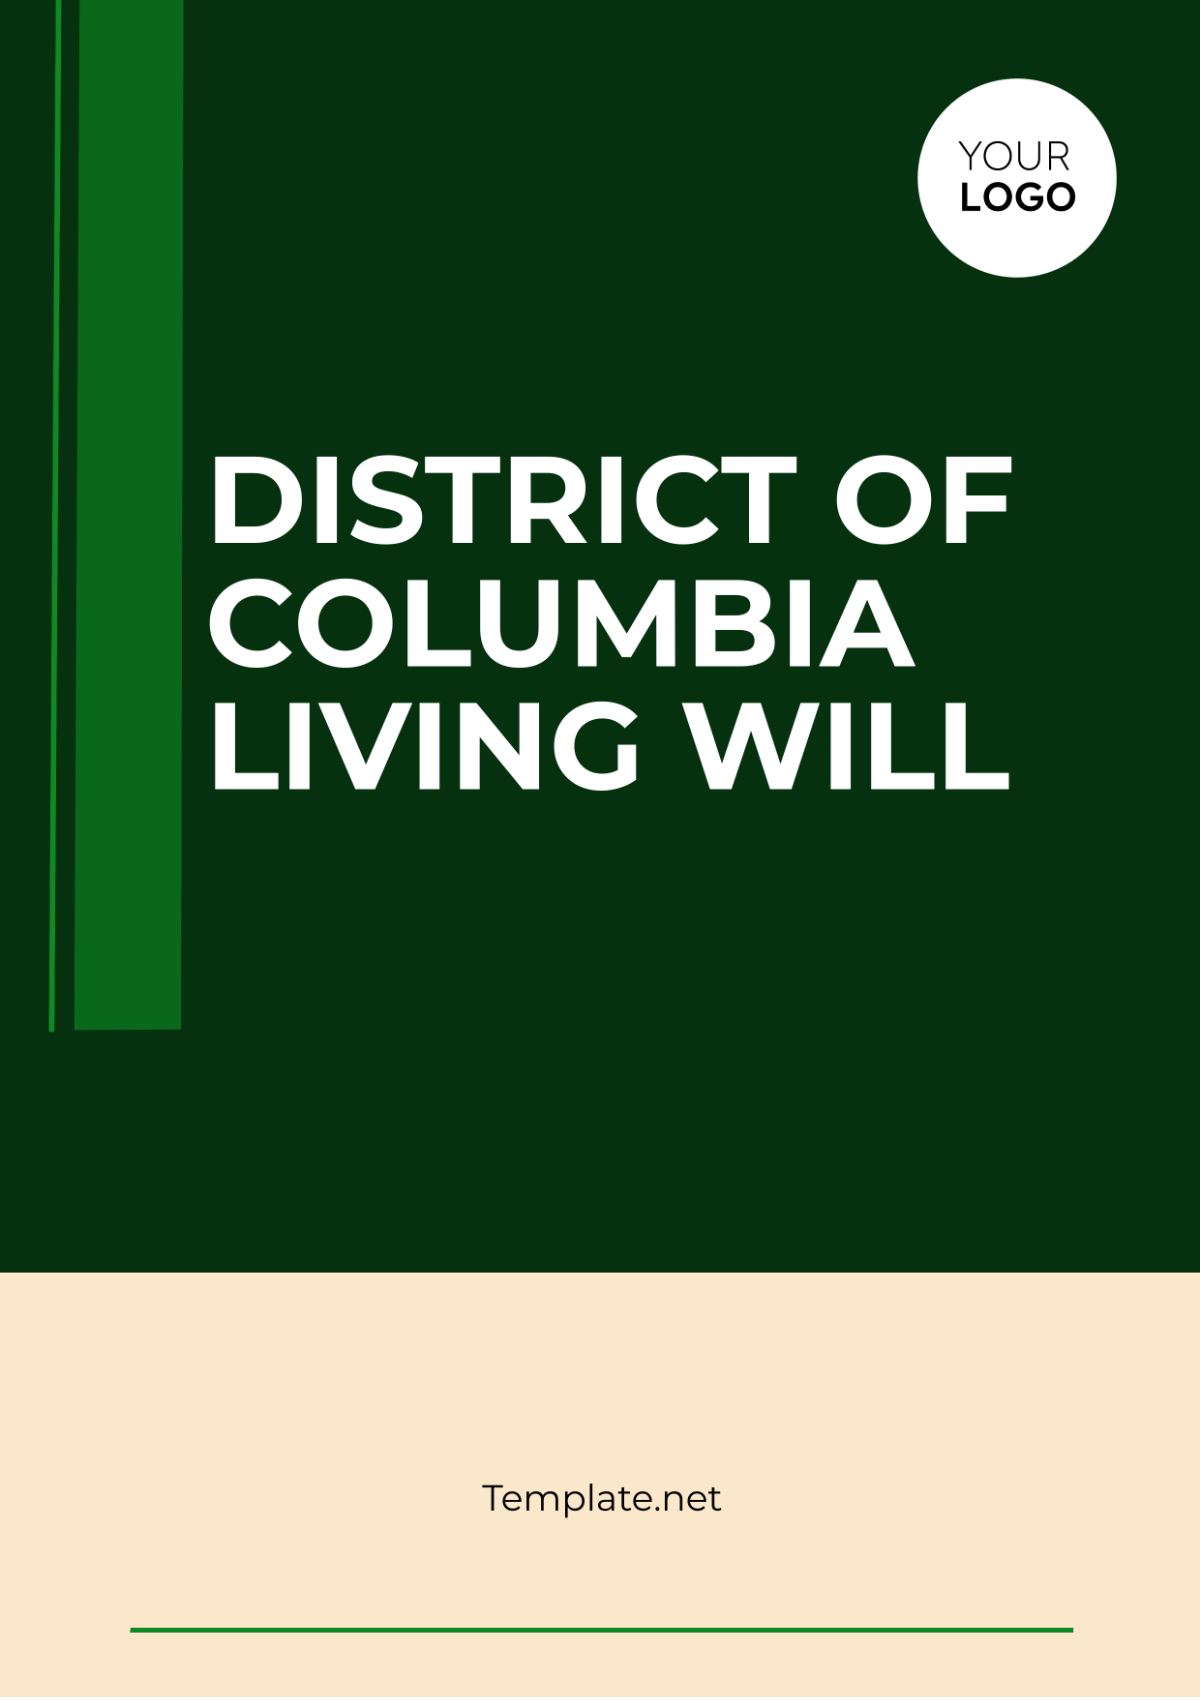 Free District of Columbia Living Will Template